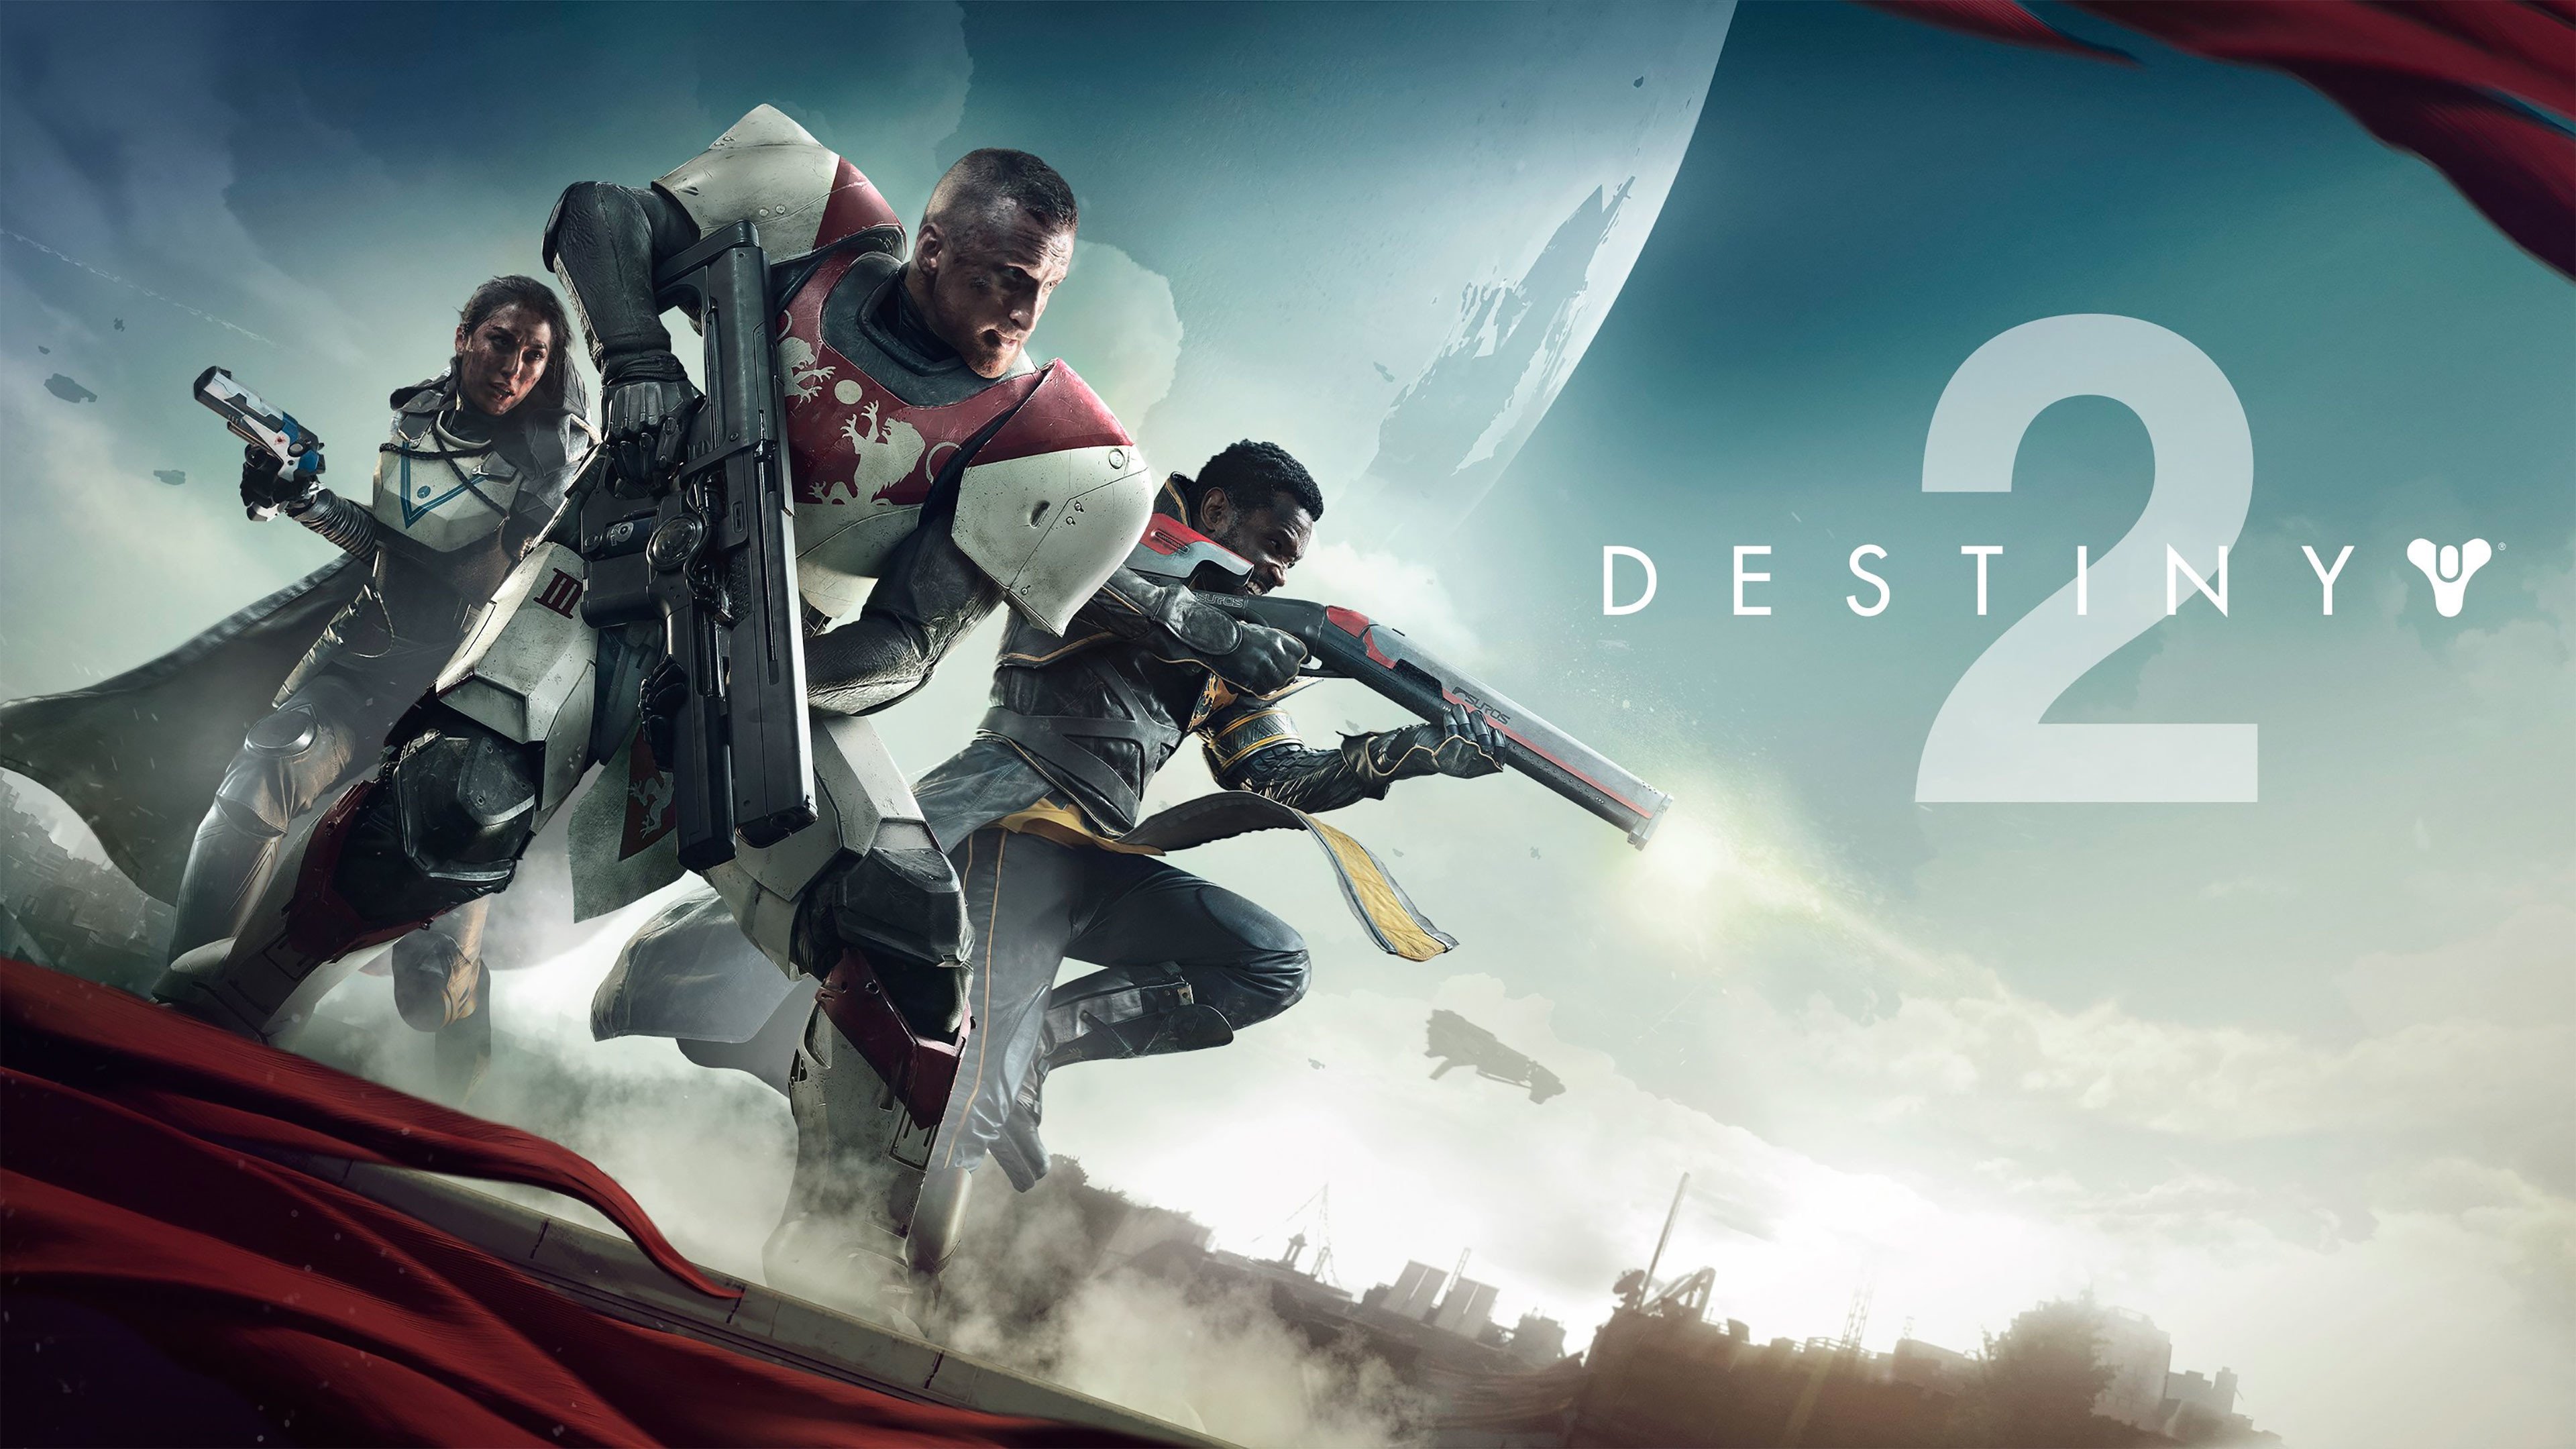 Destiny 2 Wallpapers HD Free download 